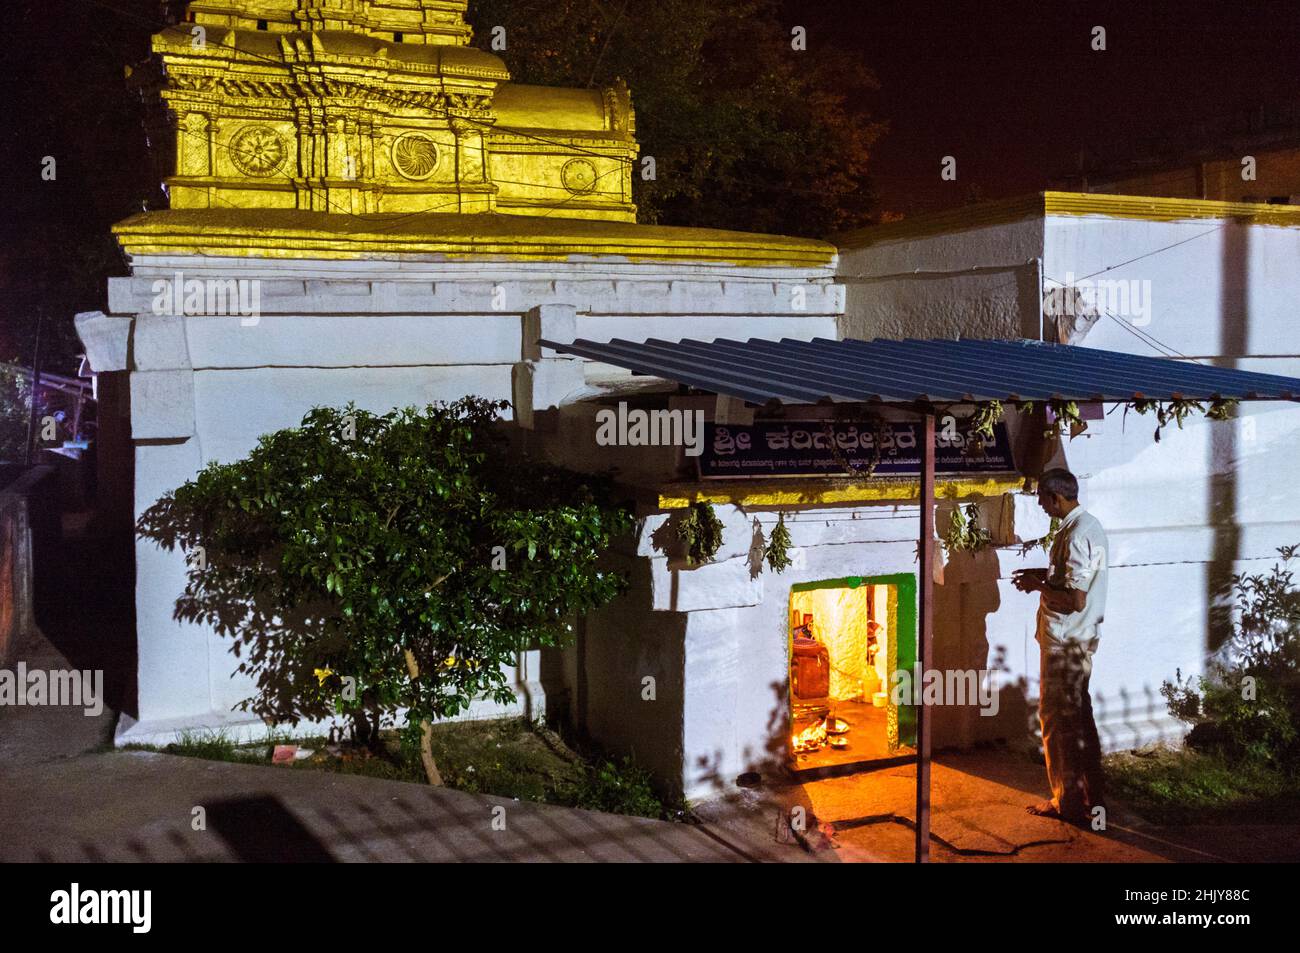 Belur, Karnataka, India : A man stands on prayer before a small shrine in the street at night. Stock Photo